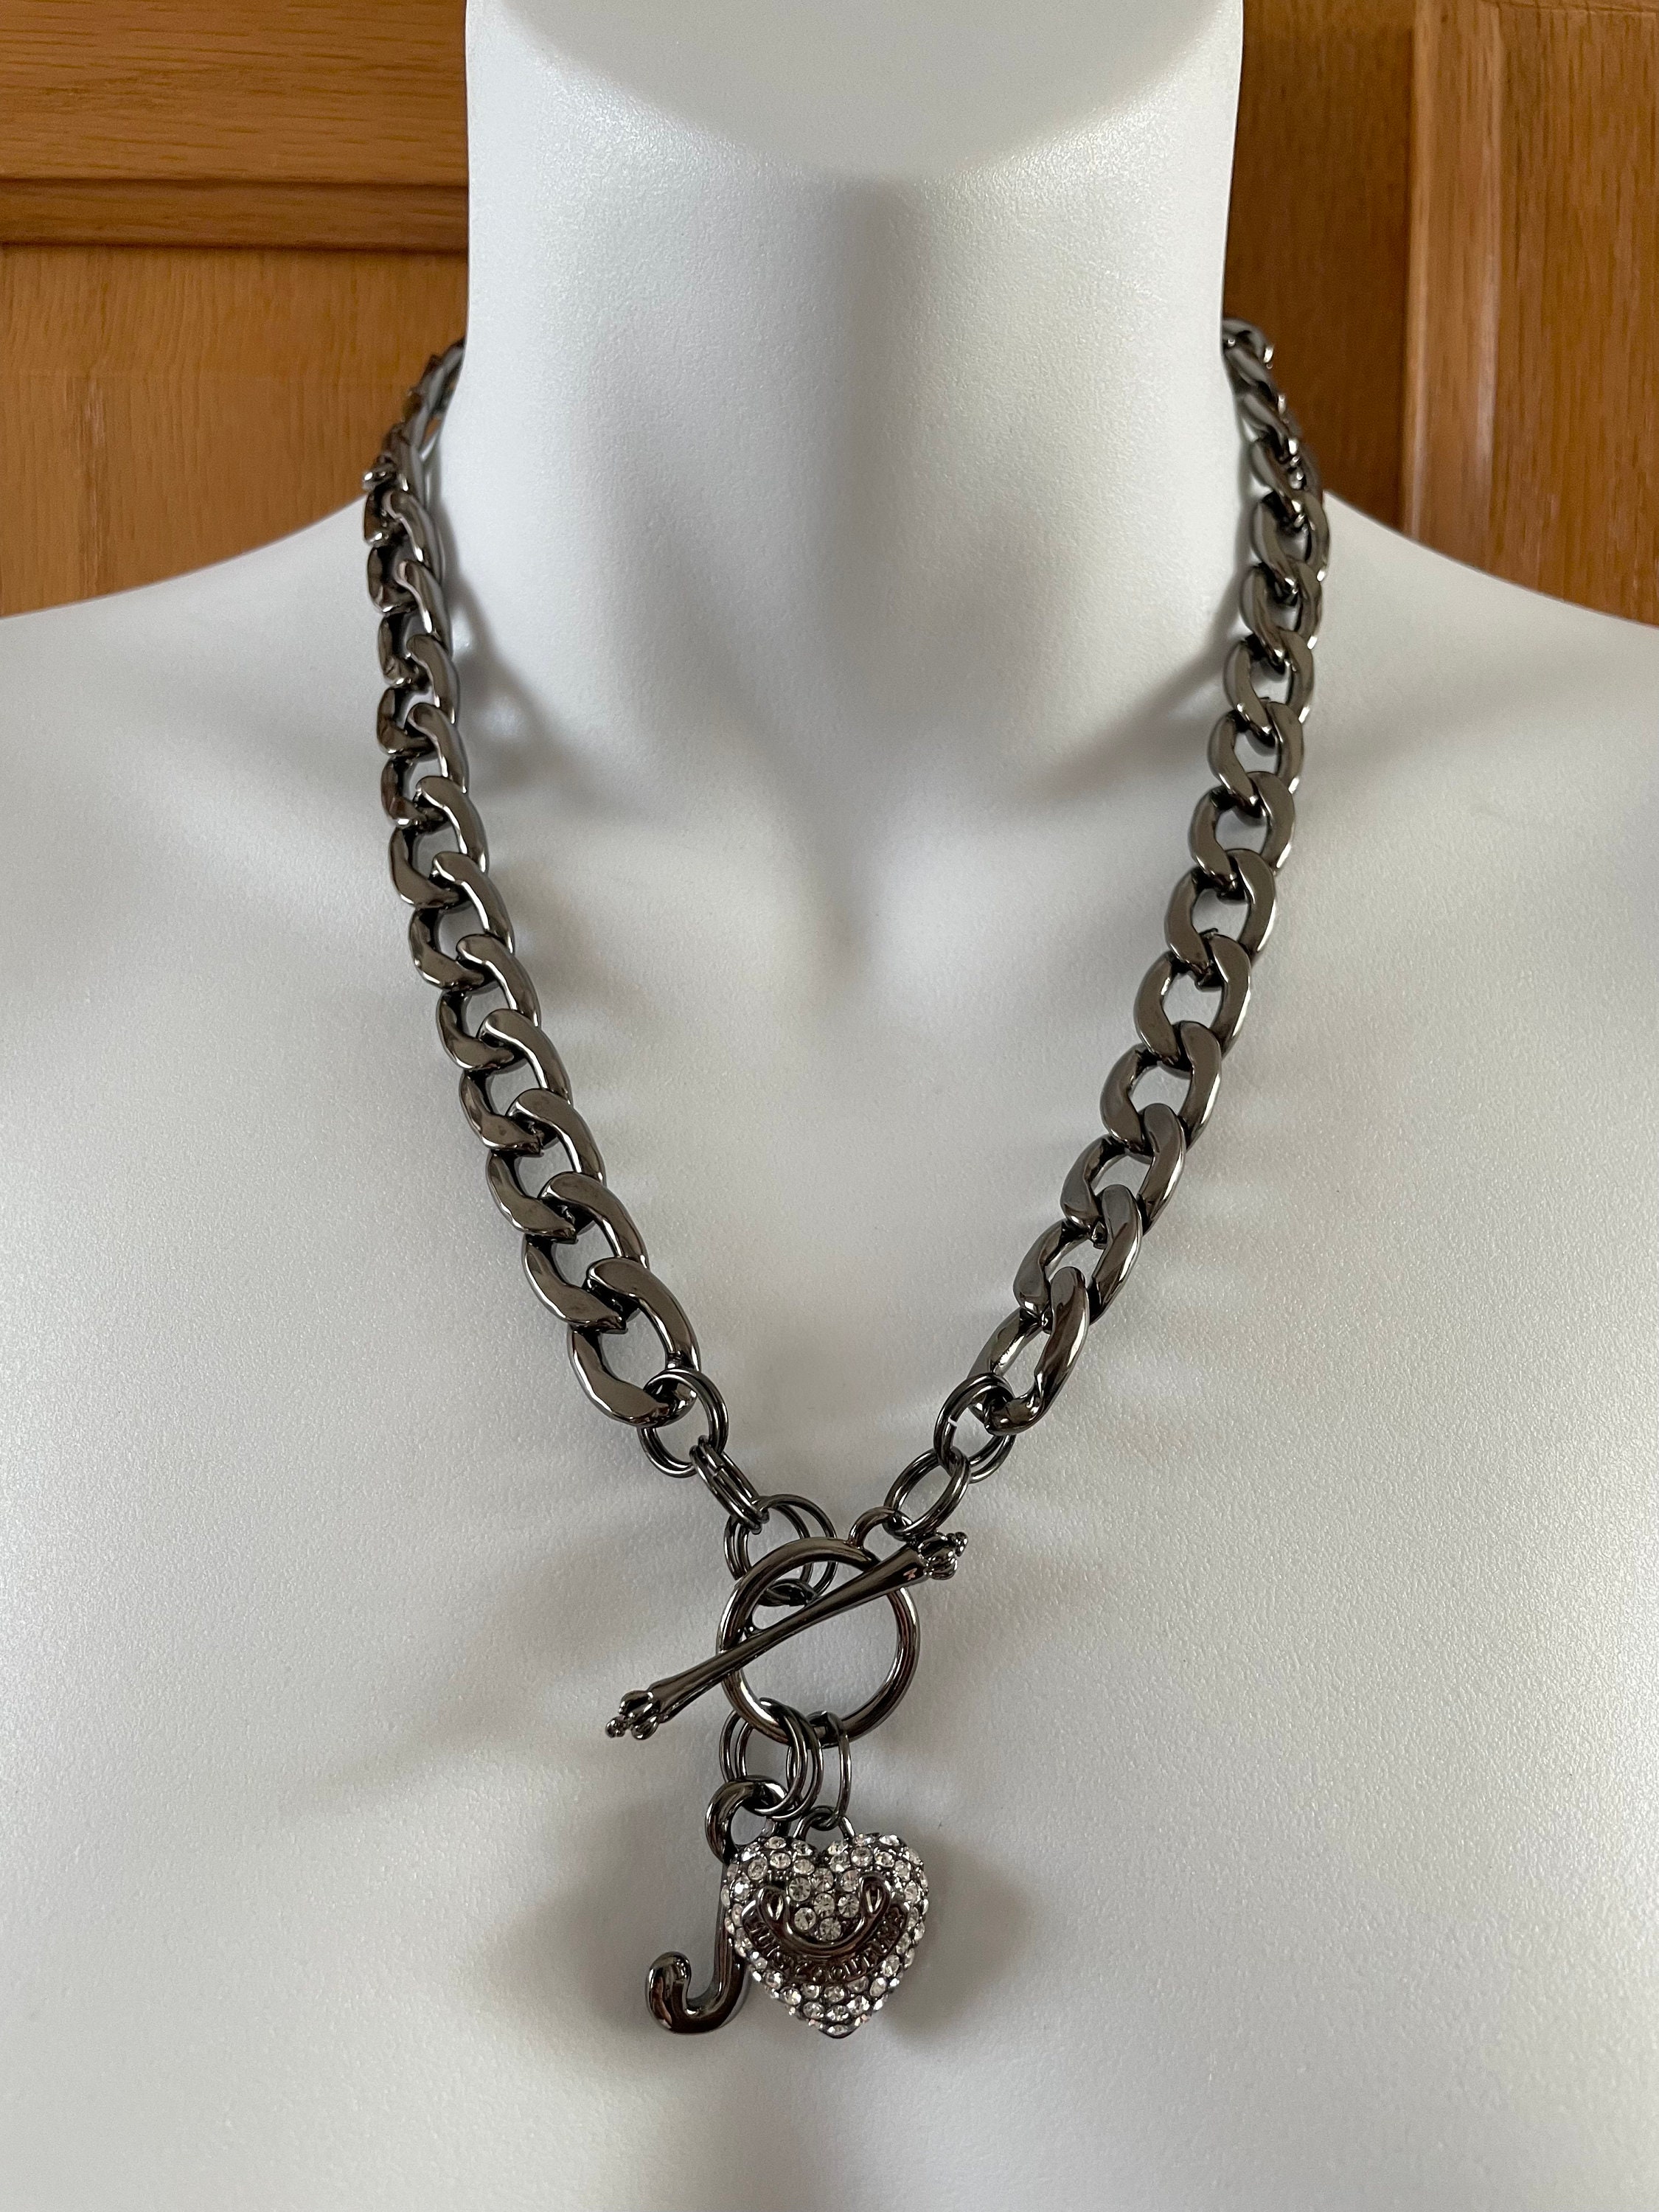 Juicy couture necklaces - jewelry - by owner - sale - craigslist